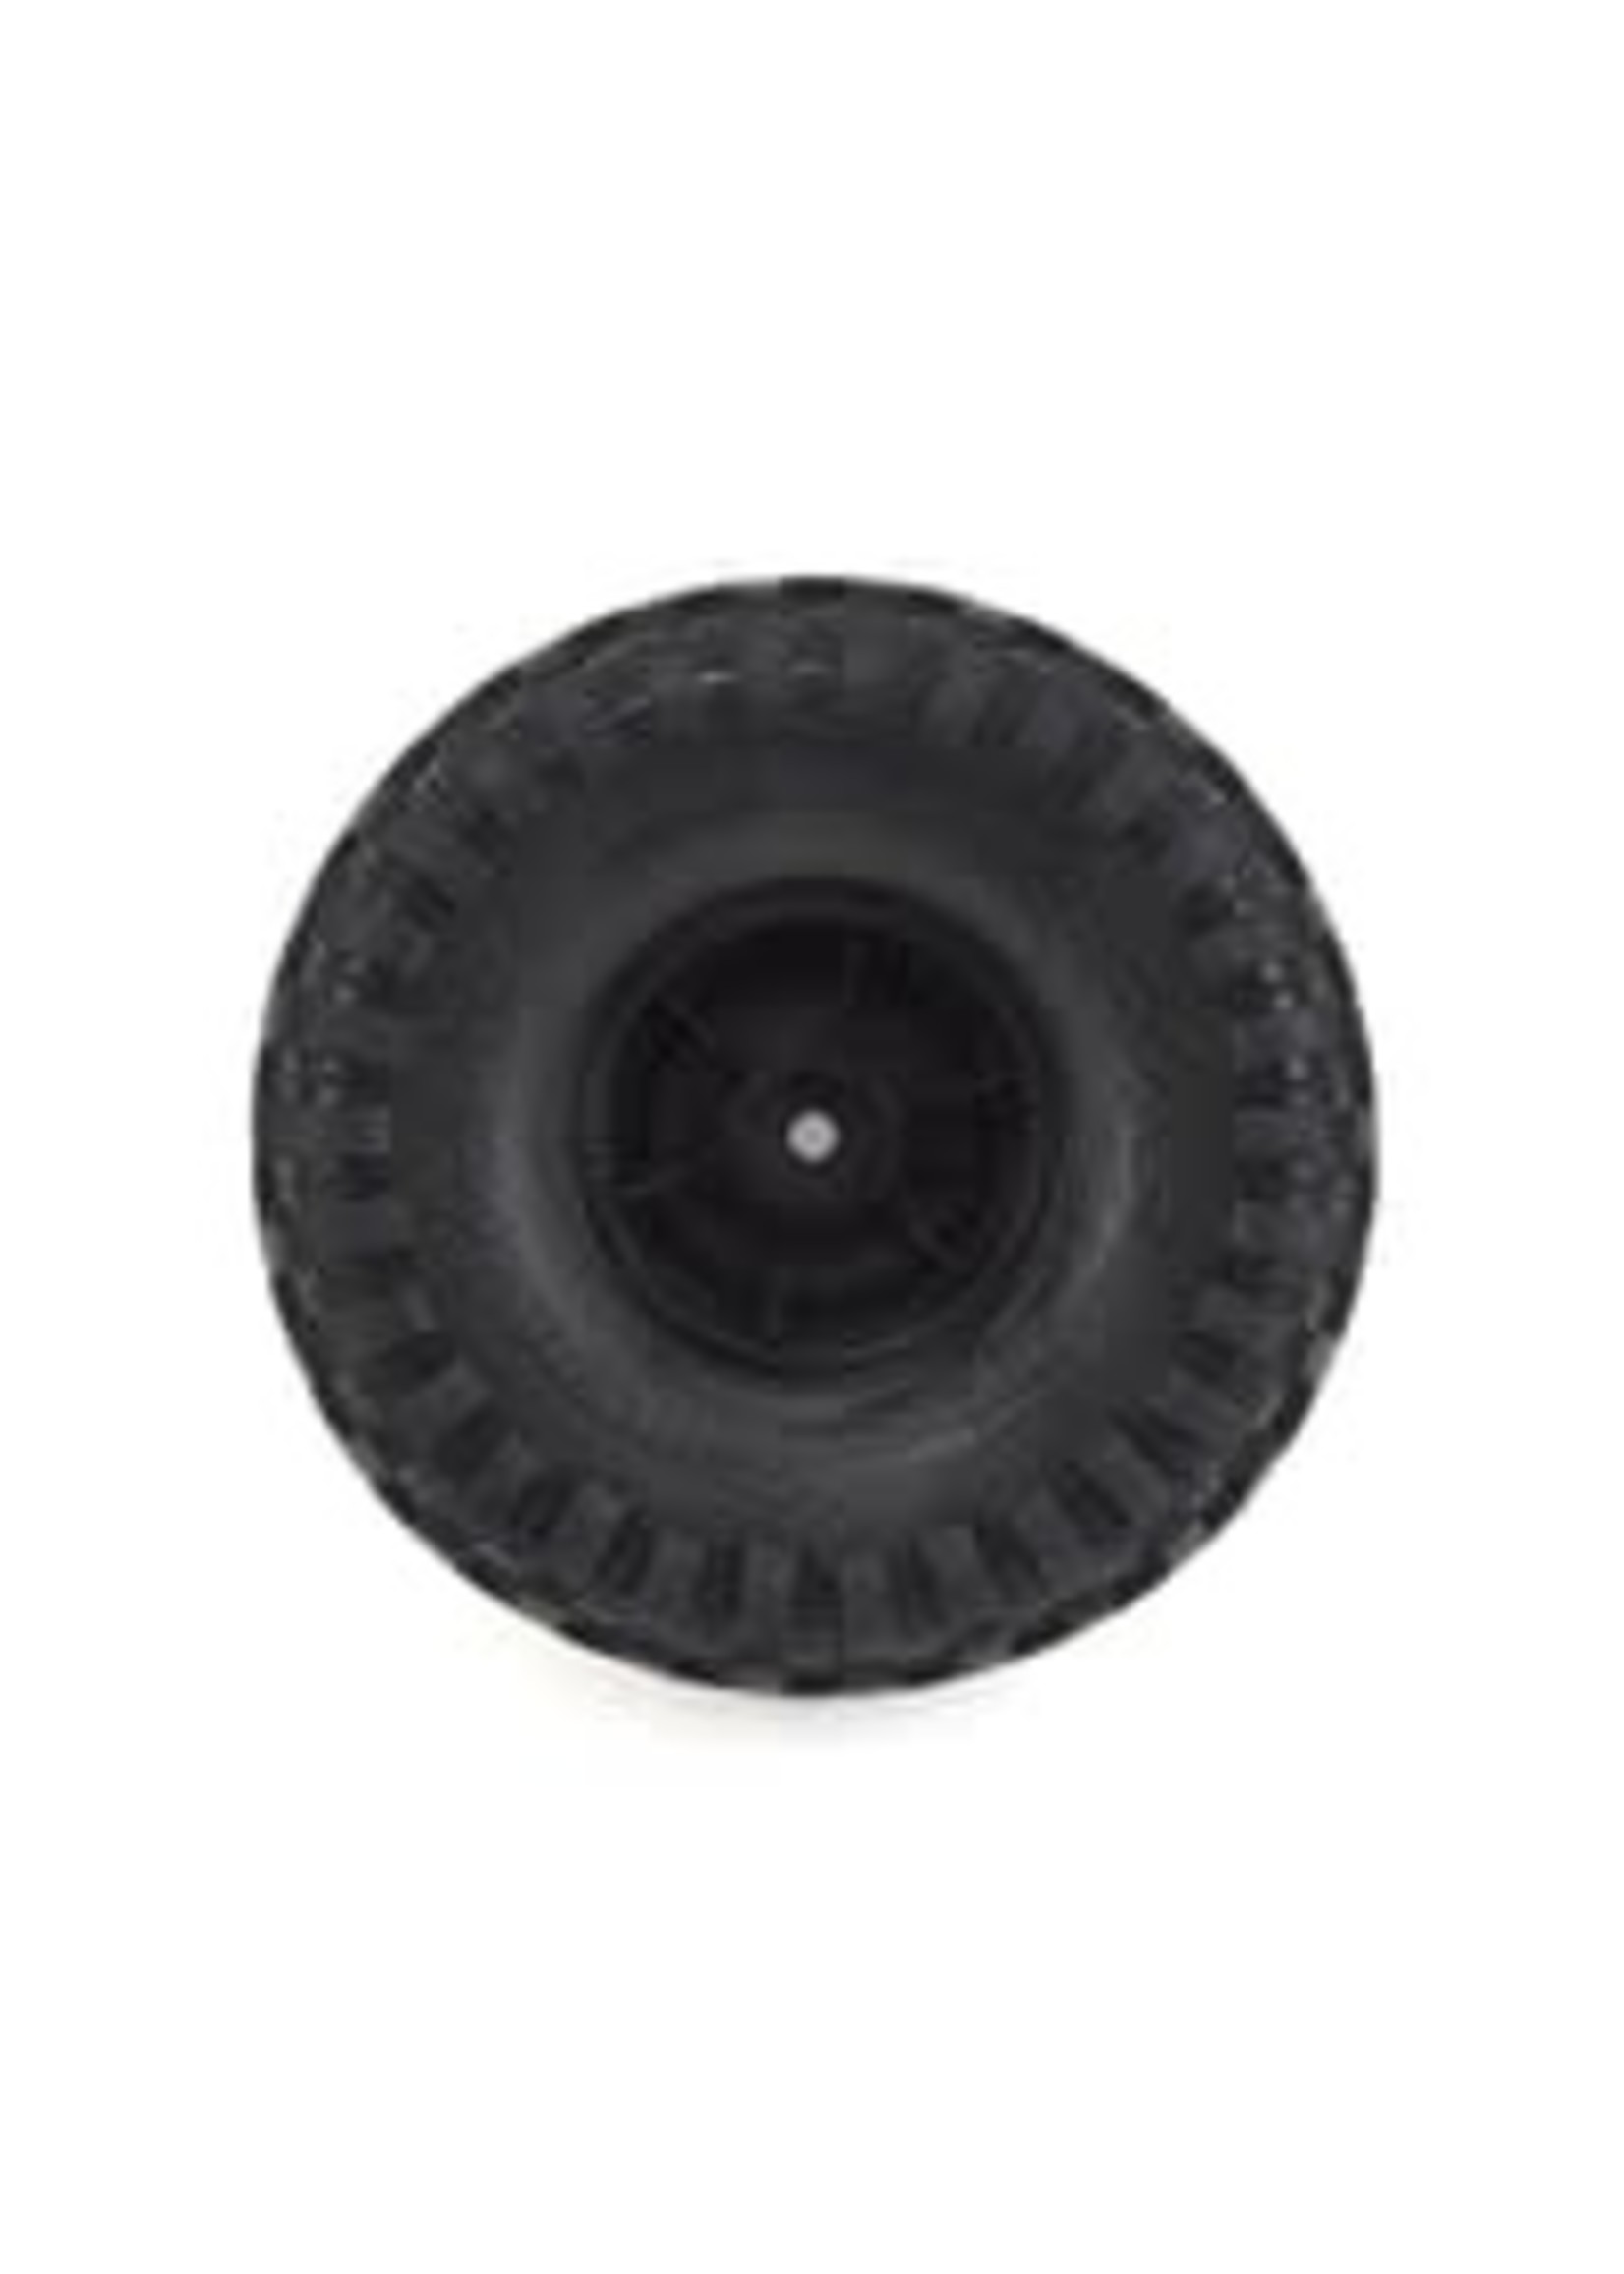 Traxxas 8273 Tires and wheels, assembled, glued (Tactical 1.9'' wheels, Canyon Trail 4.6x1.9'' tires) (2)